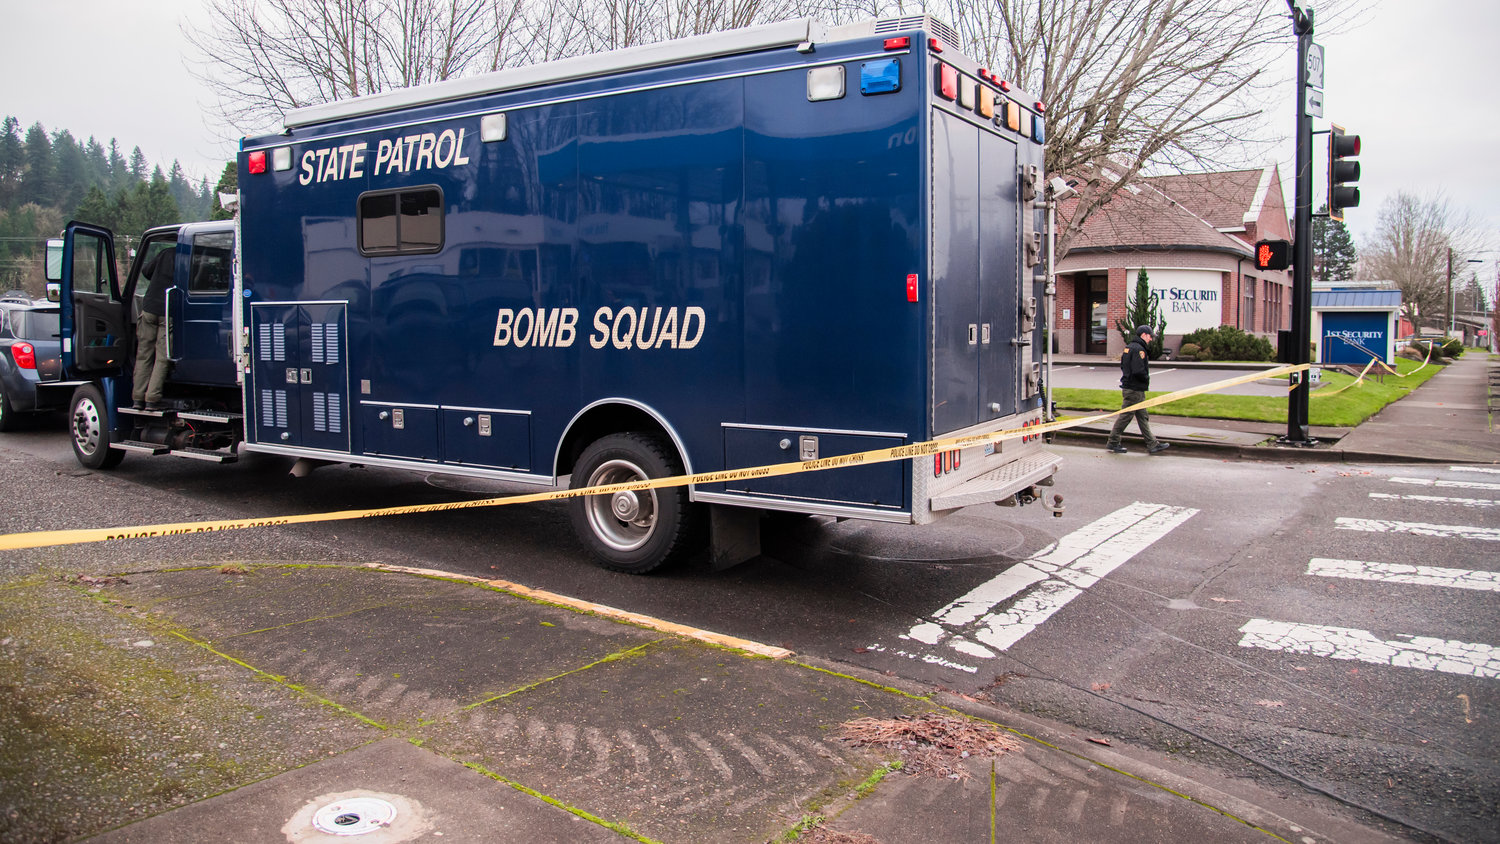 The Washington State Patrol Bomb Squard arrives on the scene at the 1st Security Bank location at 604 South Tower Avenue in Centralia after reports of an explosion in the area Sunday morning.